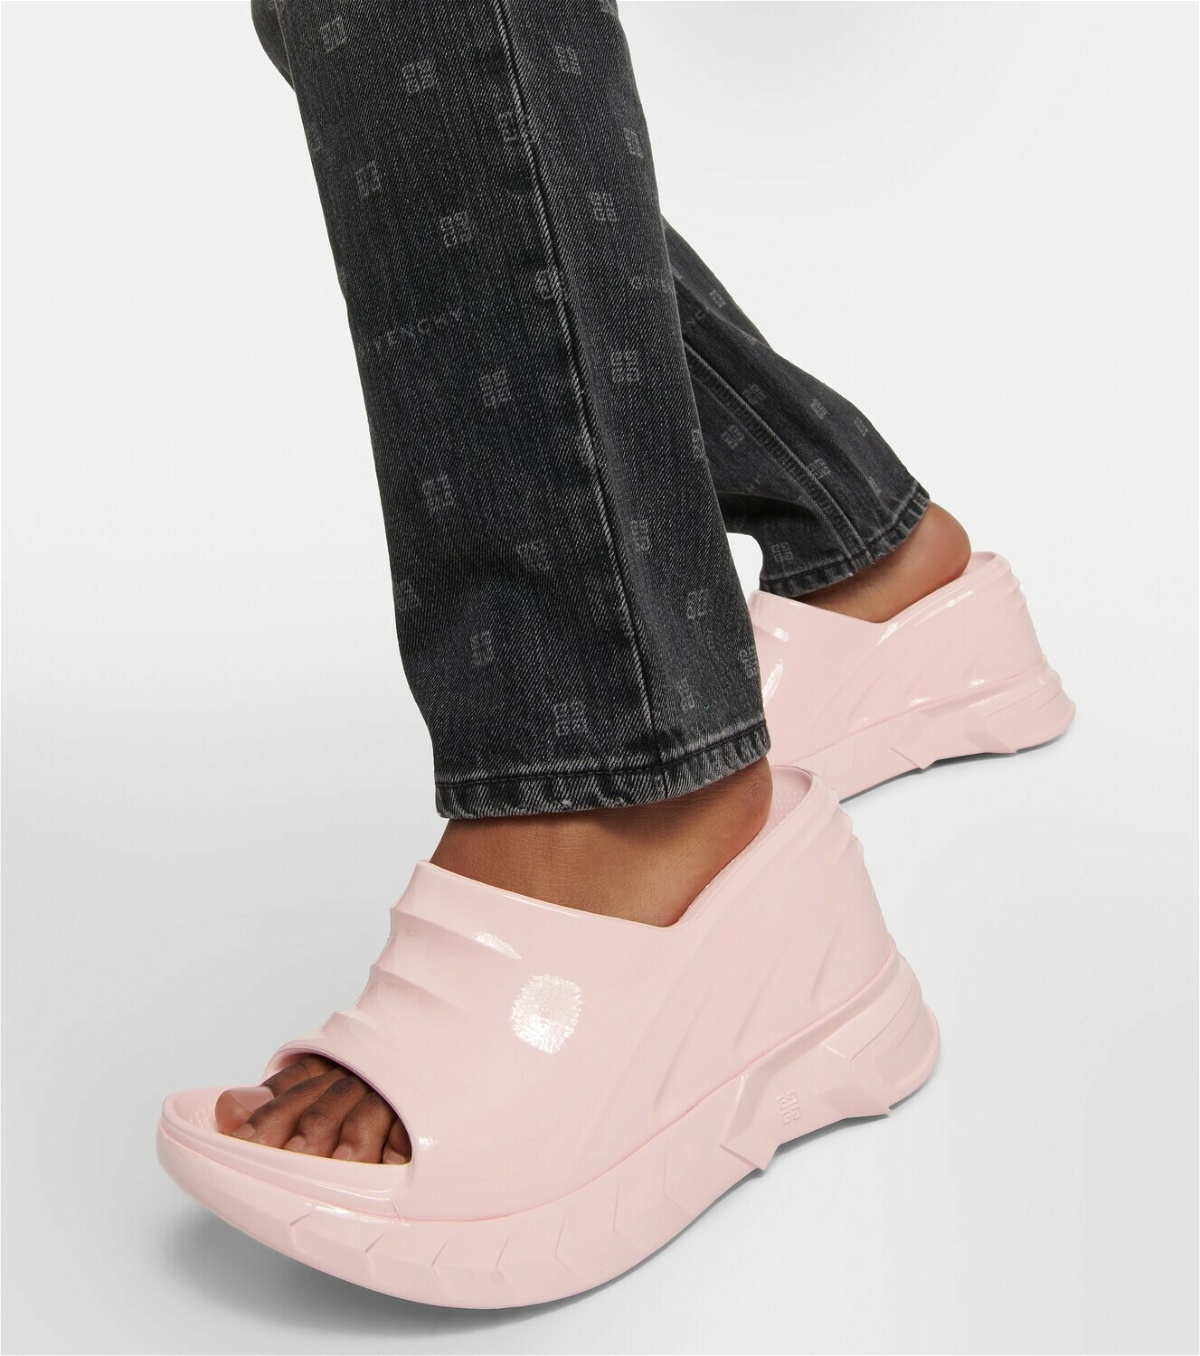 Givenchy Marshmallow wedge sandals Givenchy